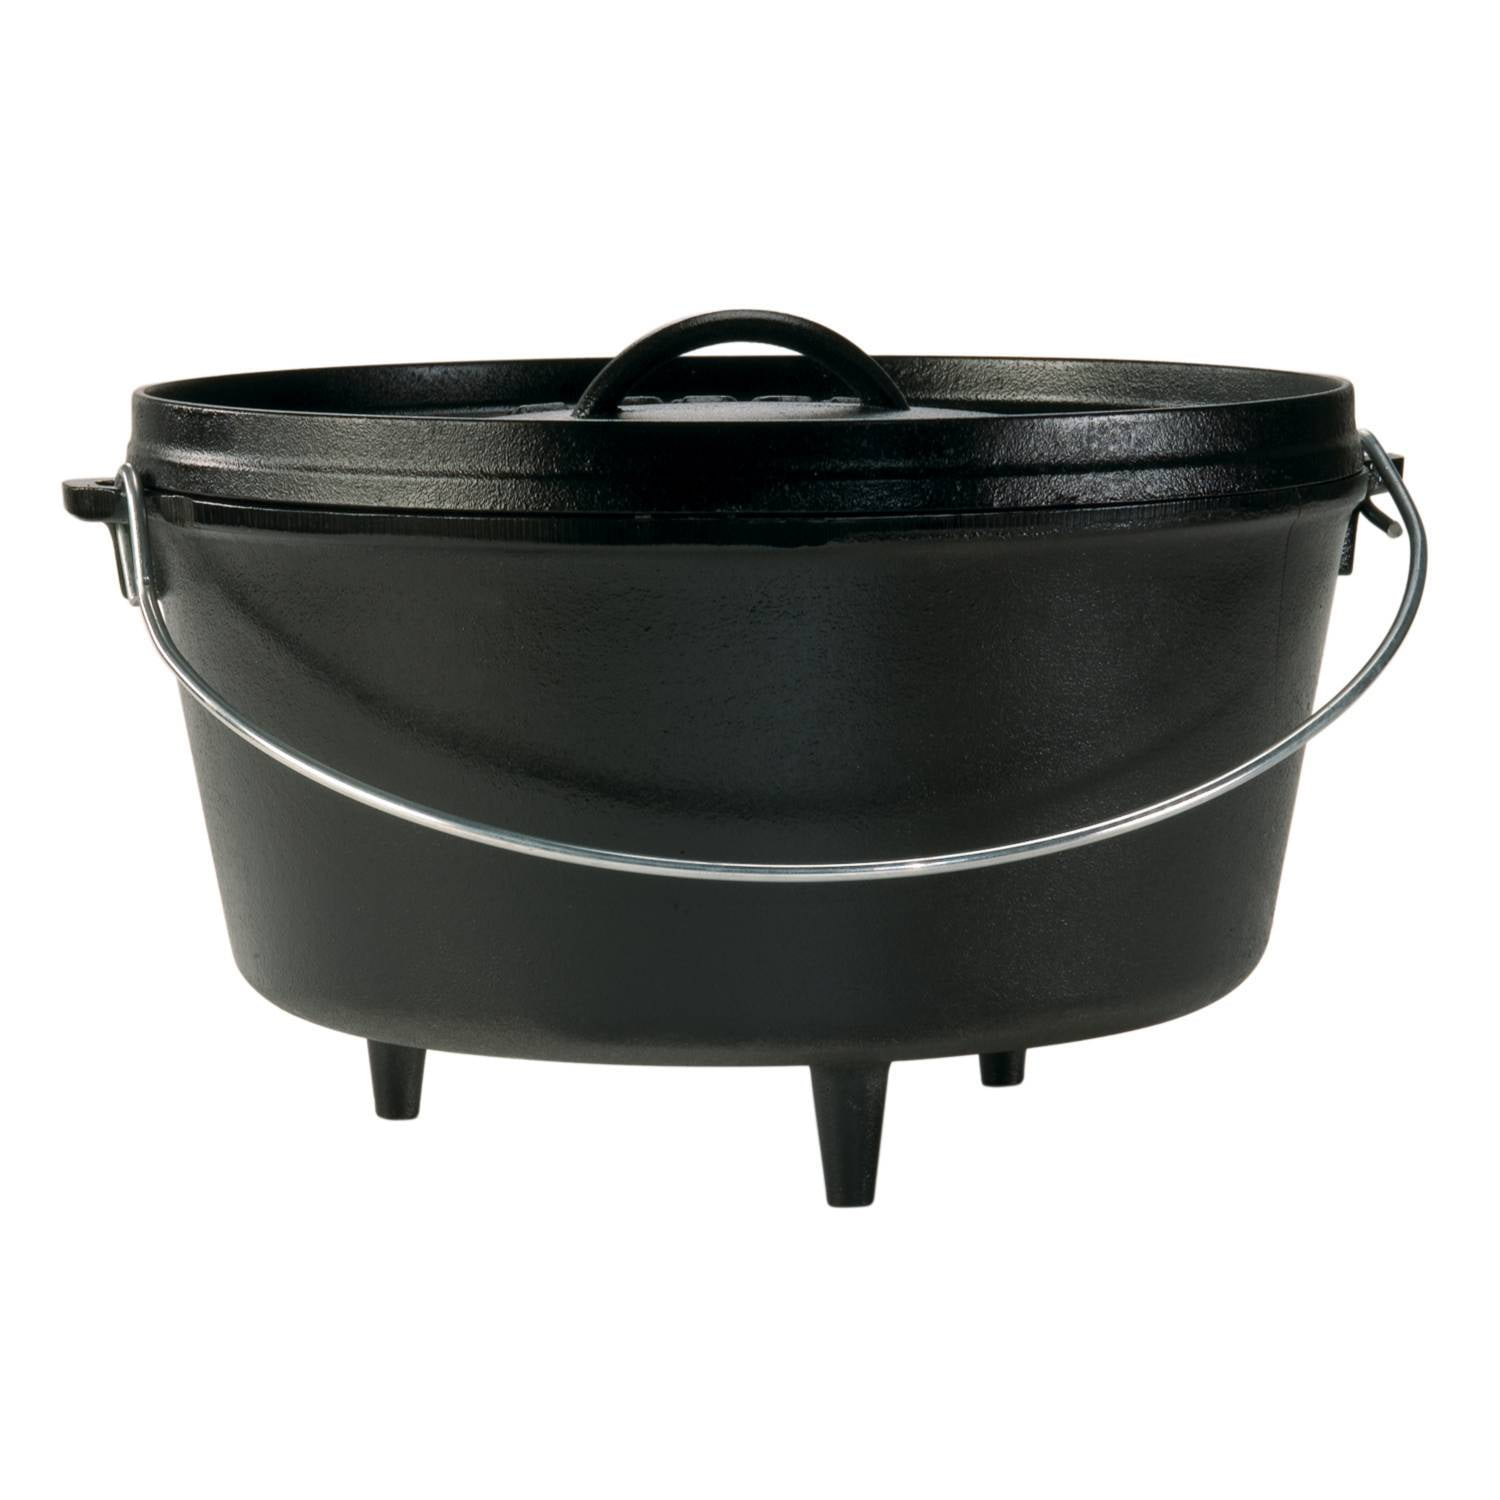 COMMERCIAL CHEF 2 Quart Cast Iron Saucepan, Dutch Oven Cast Iron Saucepan  with Lid and Looped Handle, Camping Cookware & Sauce Pan for Indoor 